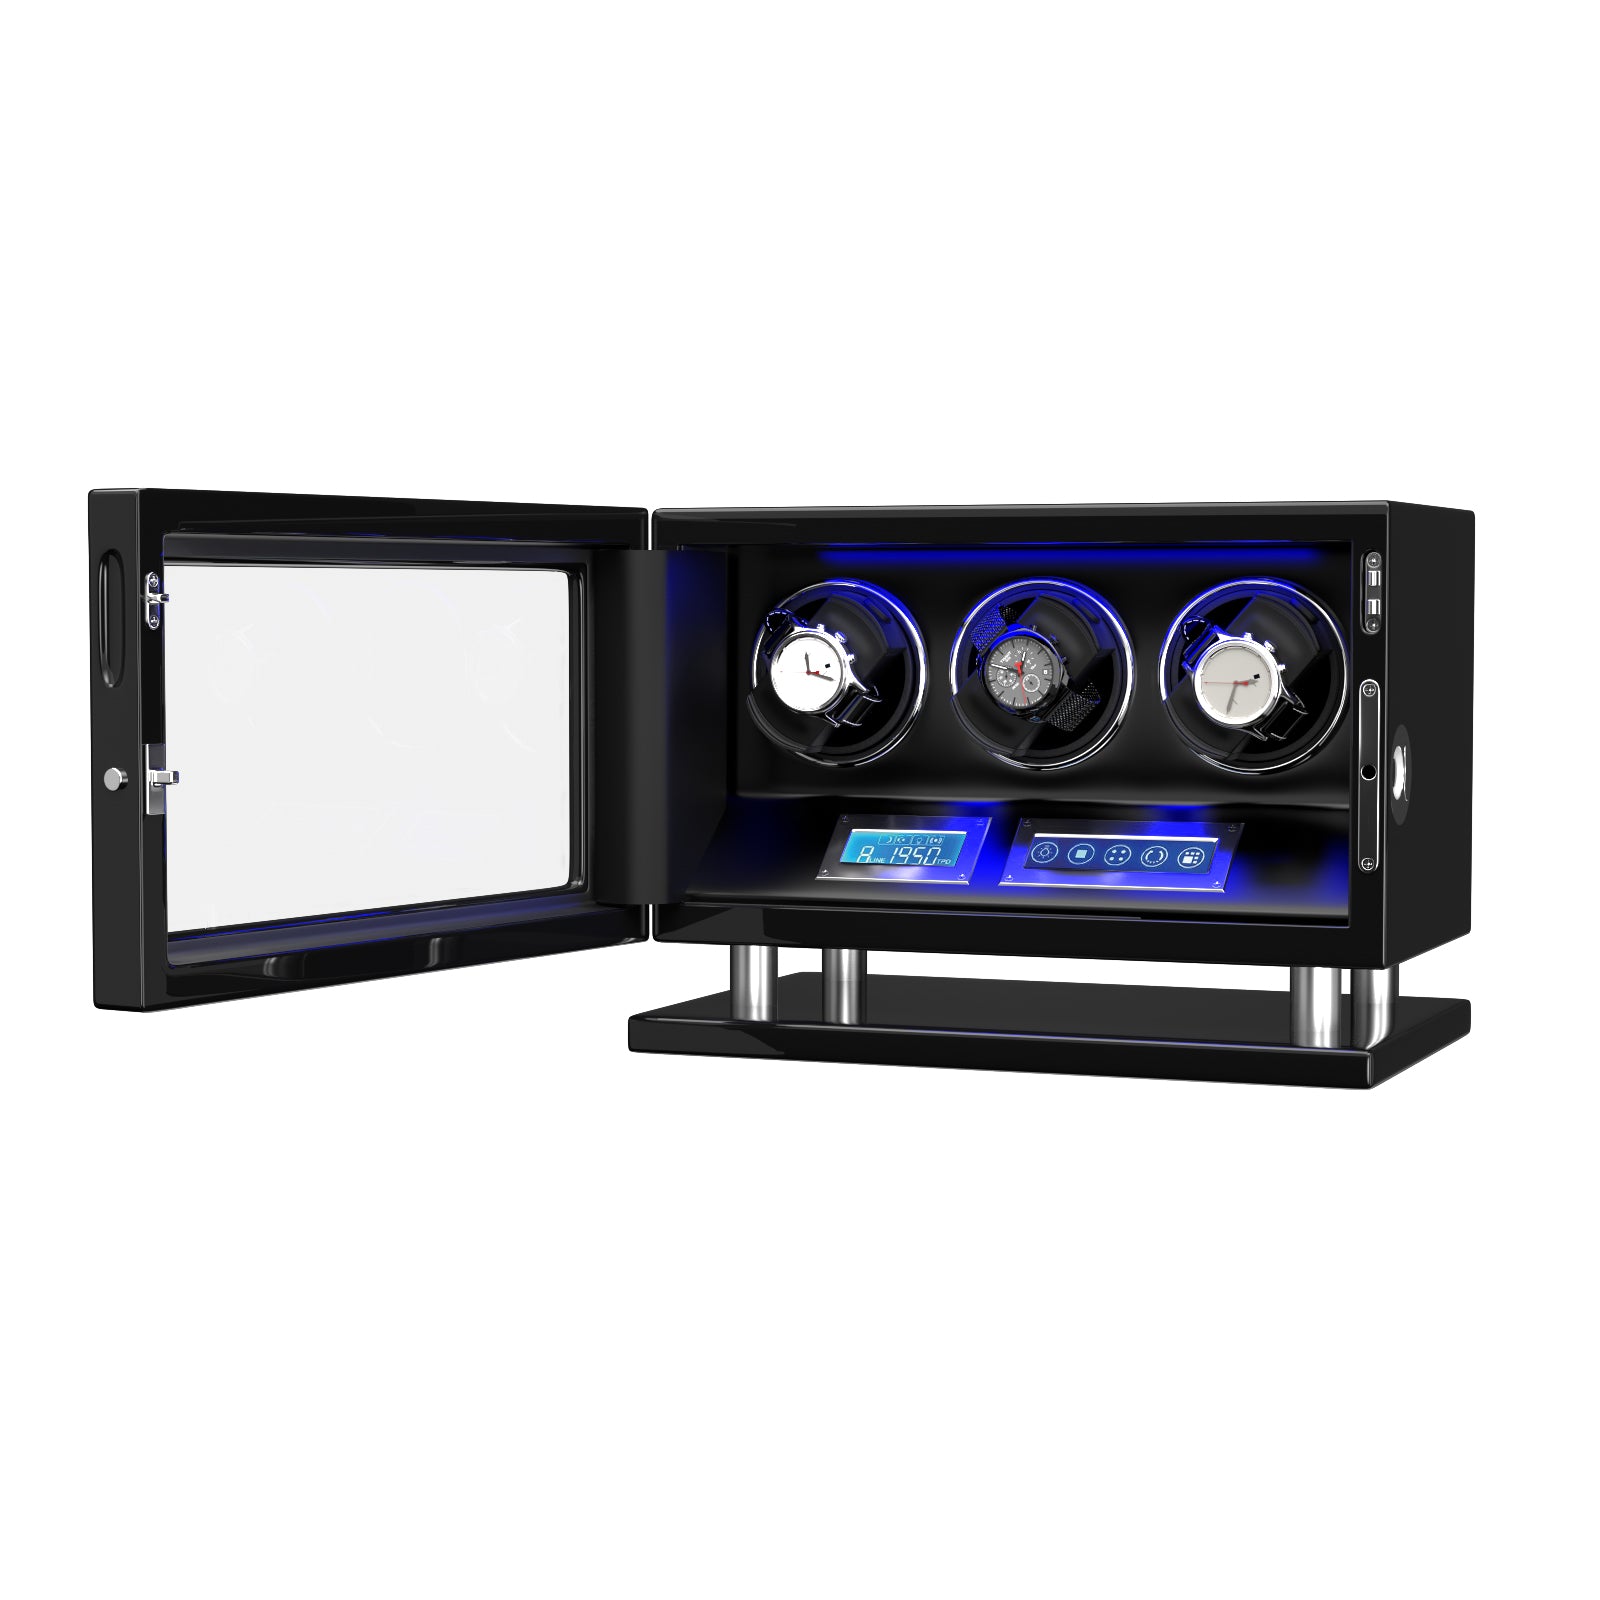 Fingerprint Unlock Watch Winder for 3 Slot Winding Spaces Automatic Watches with LCD Touchscreen Control